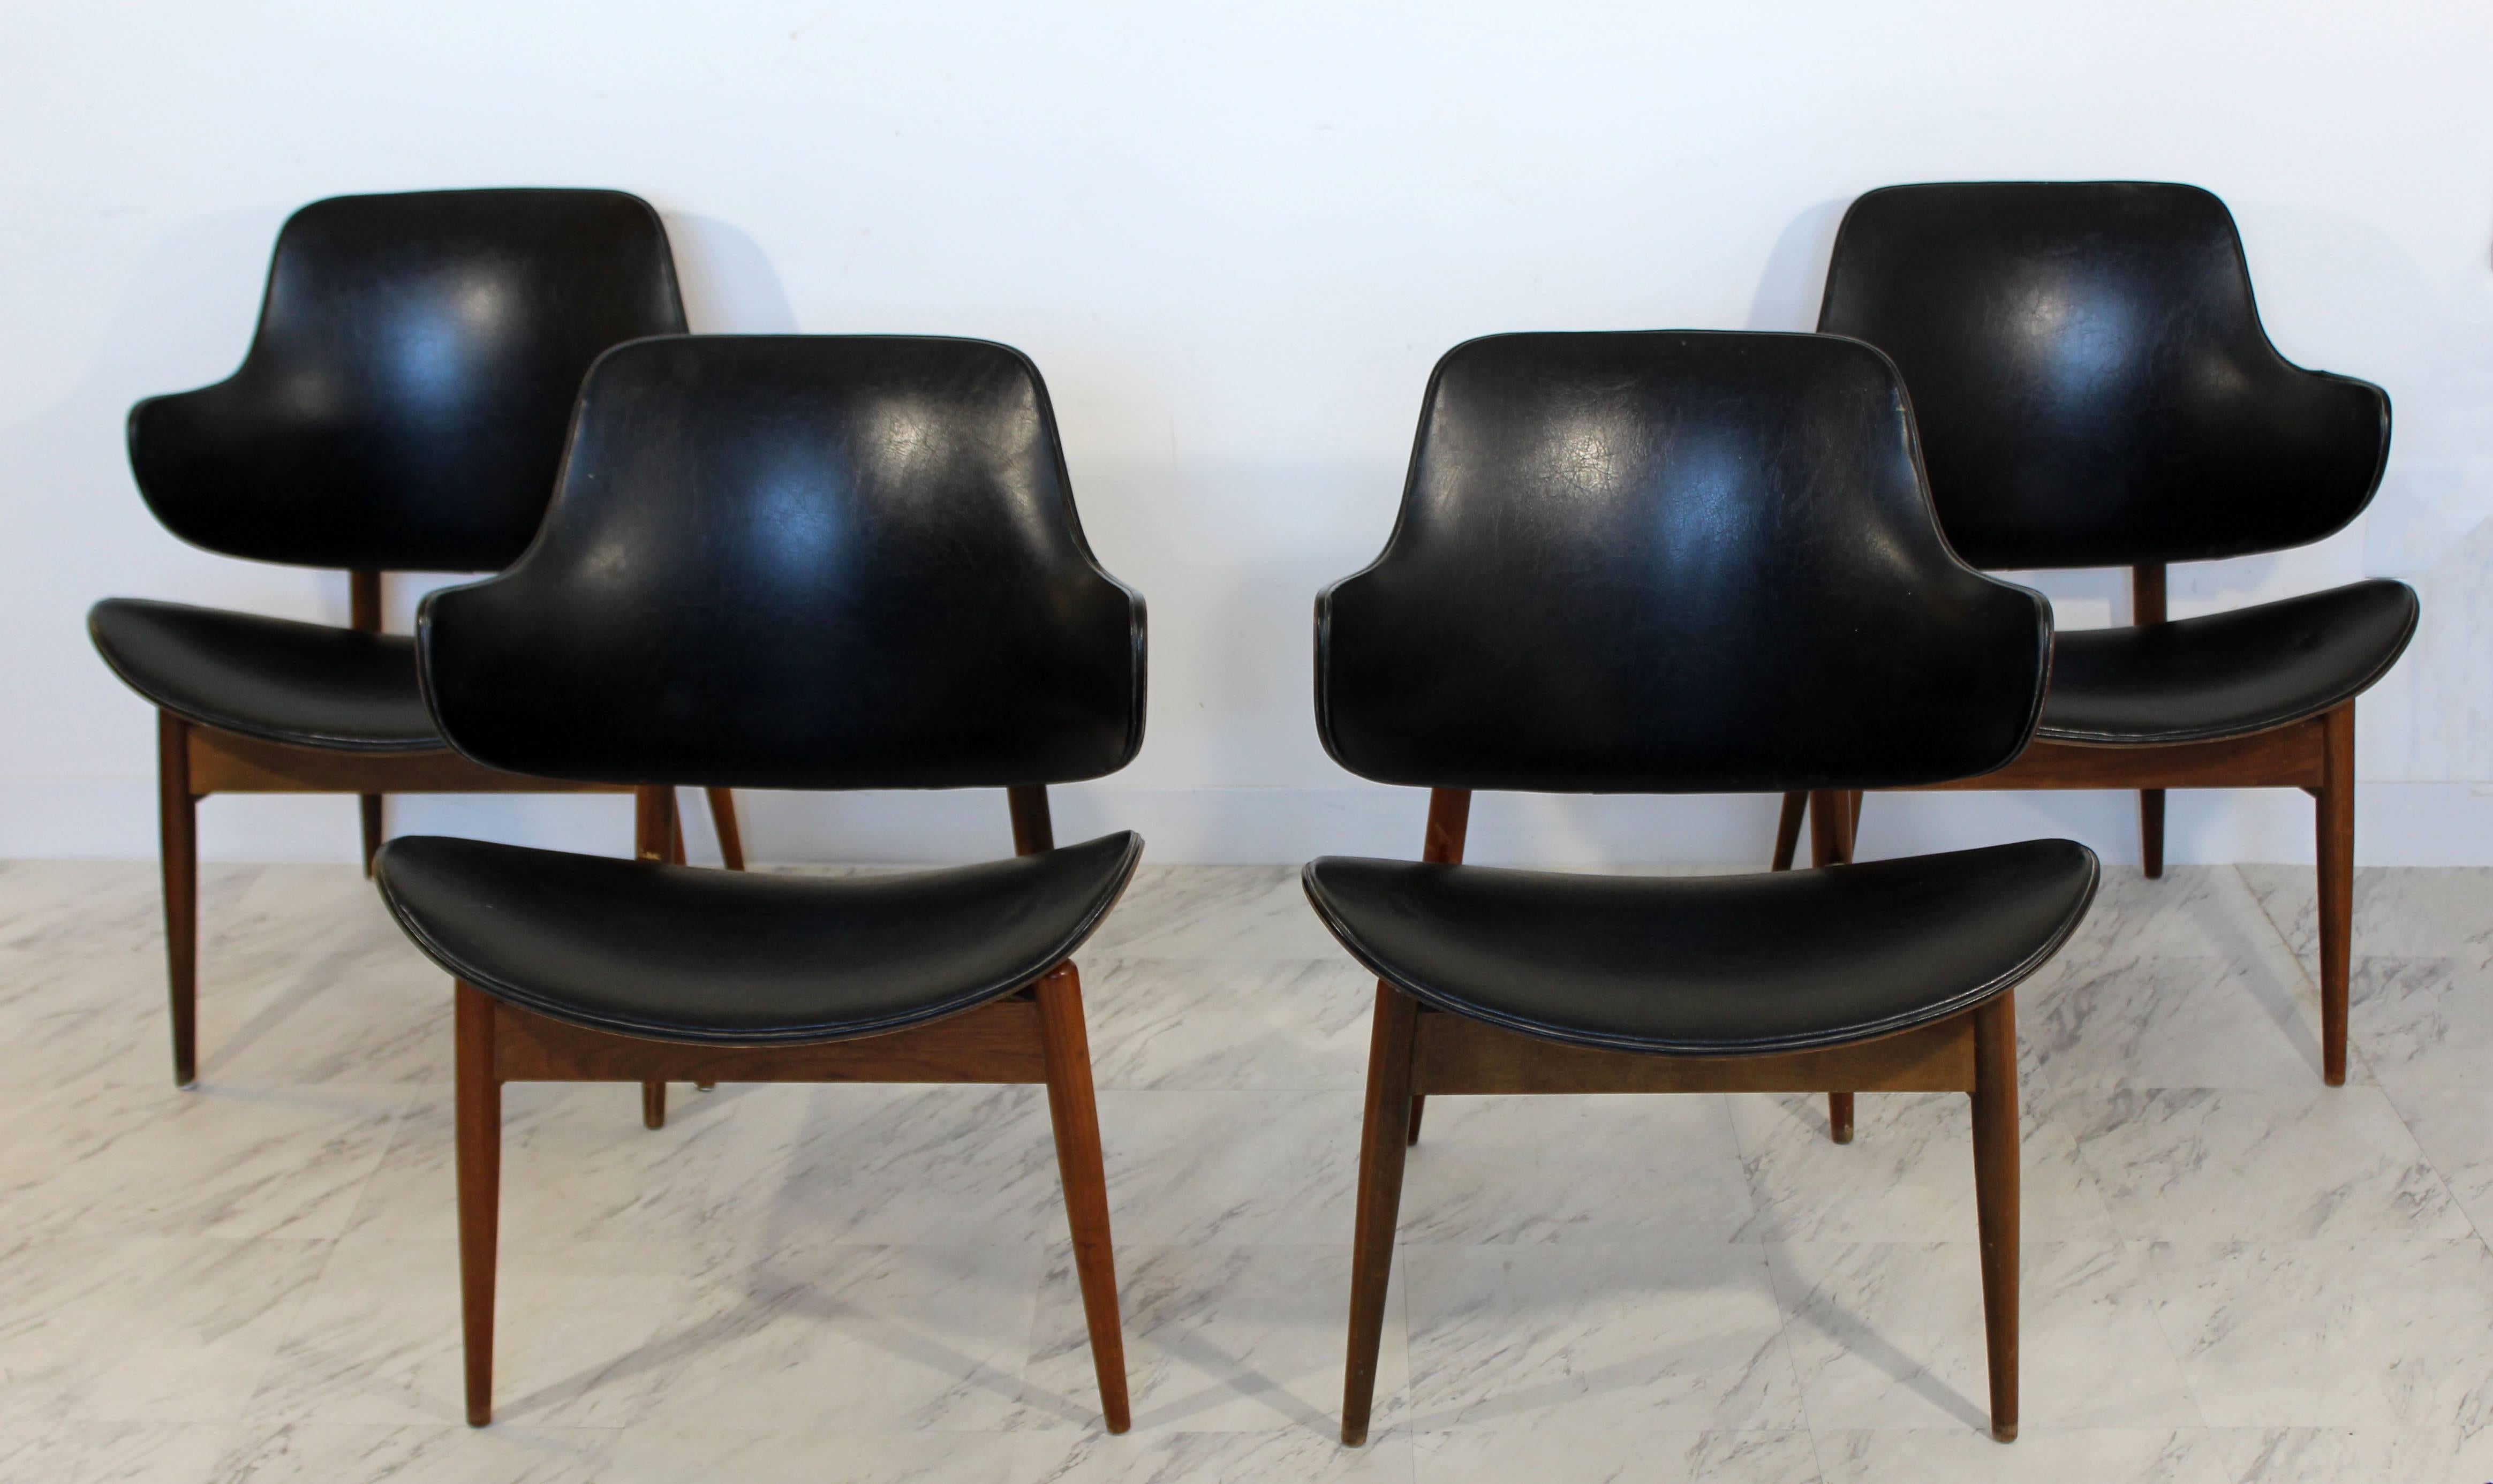 For your consideration is a fabulously sculptural, set of four dining or lounge chairs, by Seymour James Wiener for Kodawood, circa the 1960s. In excellent condition. The dimensions are 22.5